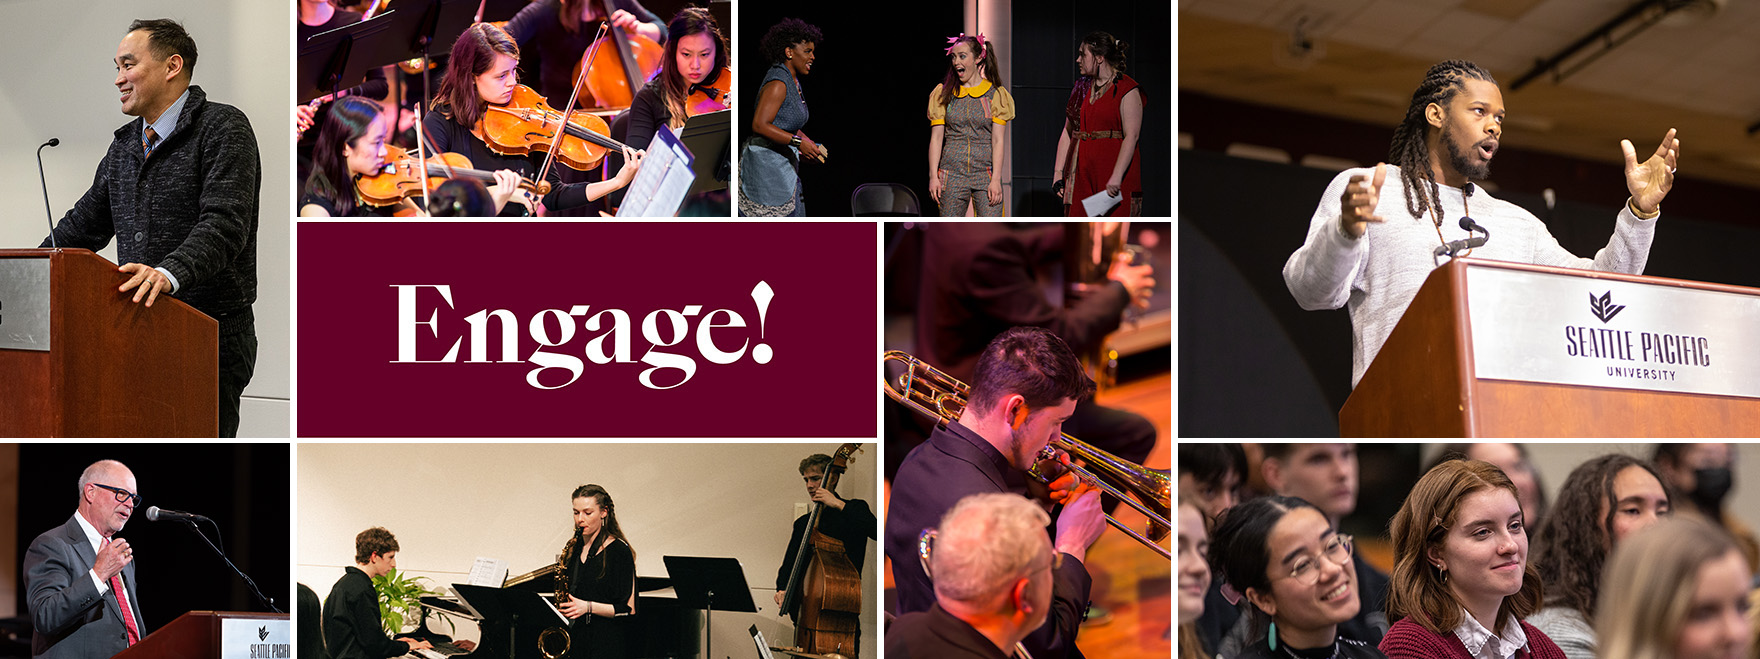 Engage! A collage of events around campus